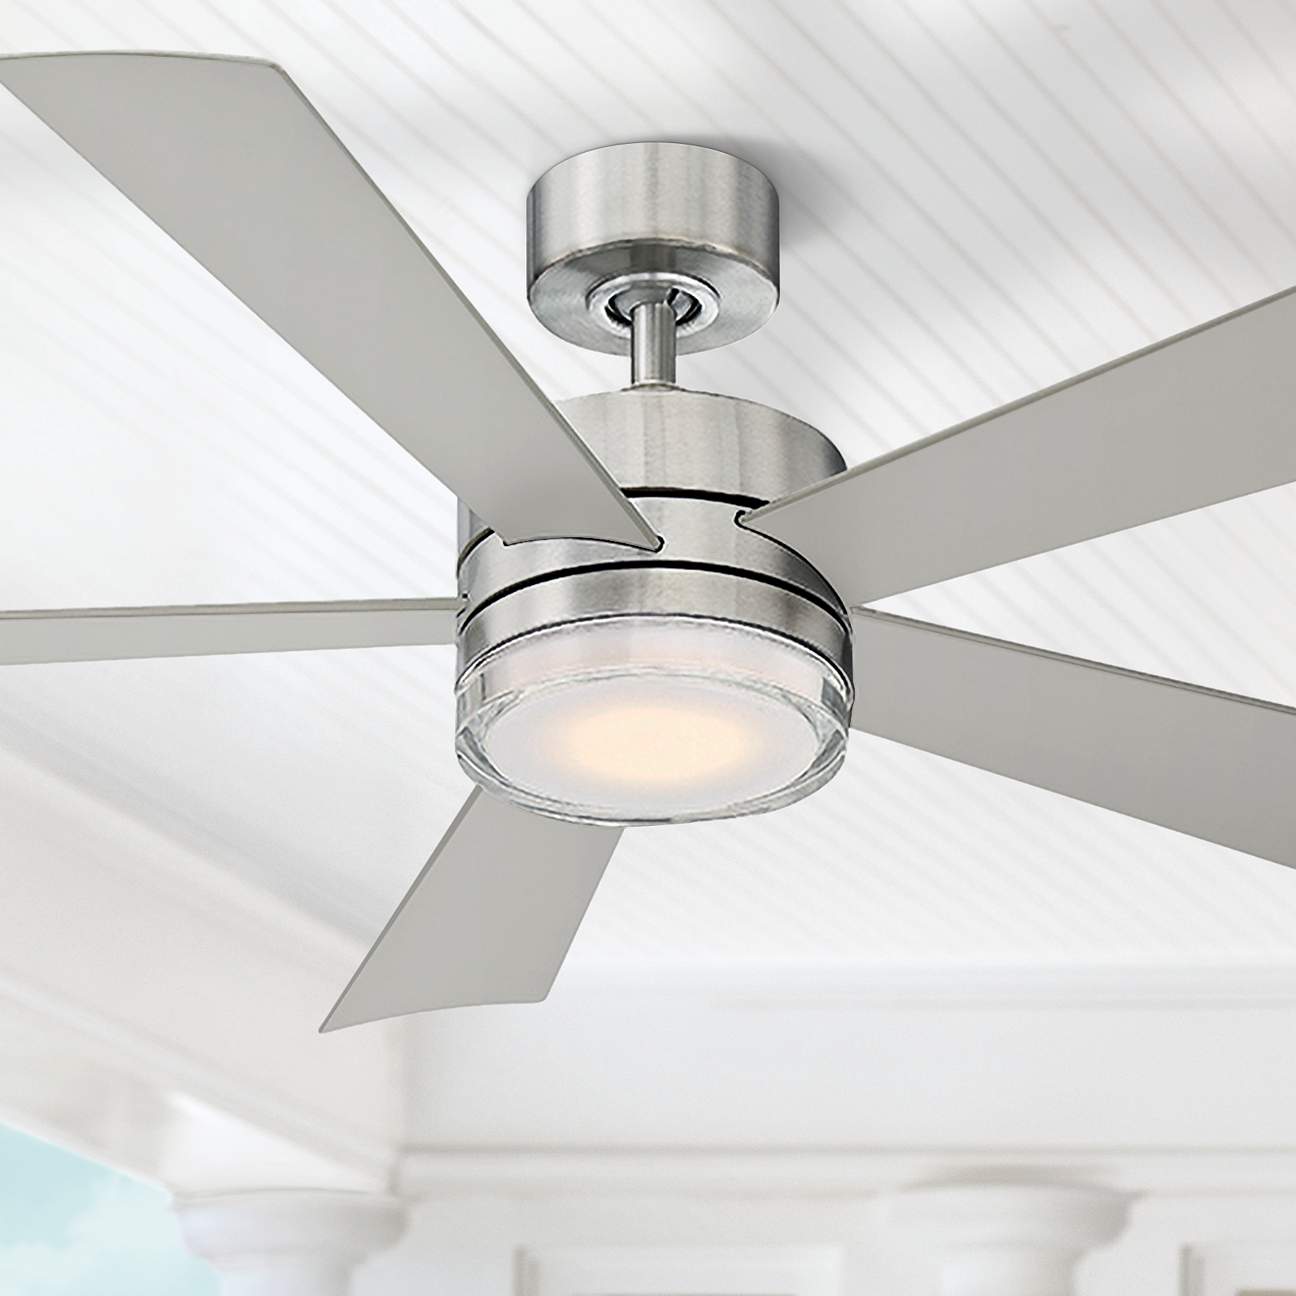 52" Modern Forms Wynd Stainless Steel LED Wet Rated Ceiling Fan Modern Stainless Steel Ceiling Fans